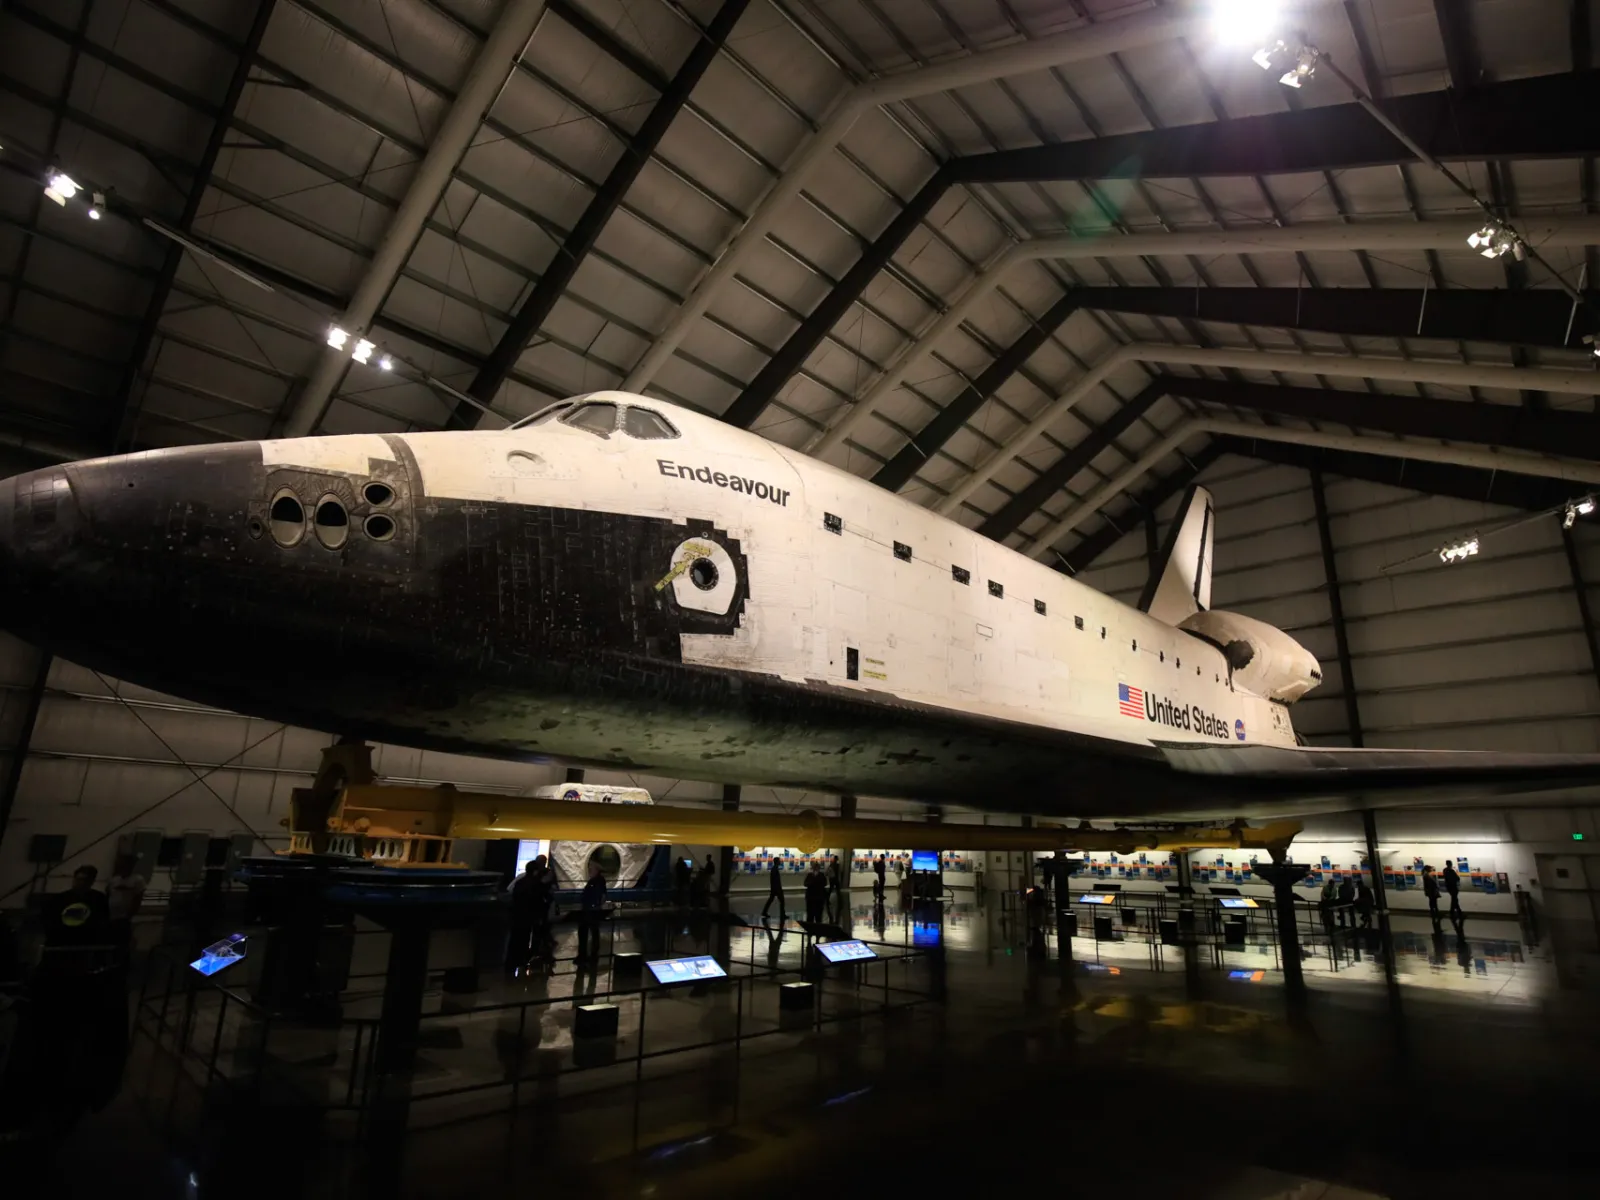 Top 10 Must Sees & Hidden Gems of the Space Shuttle Endeavour